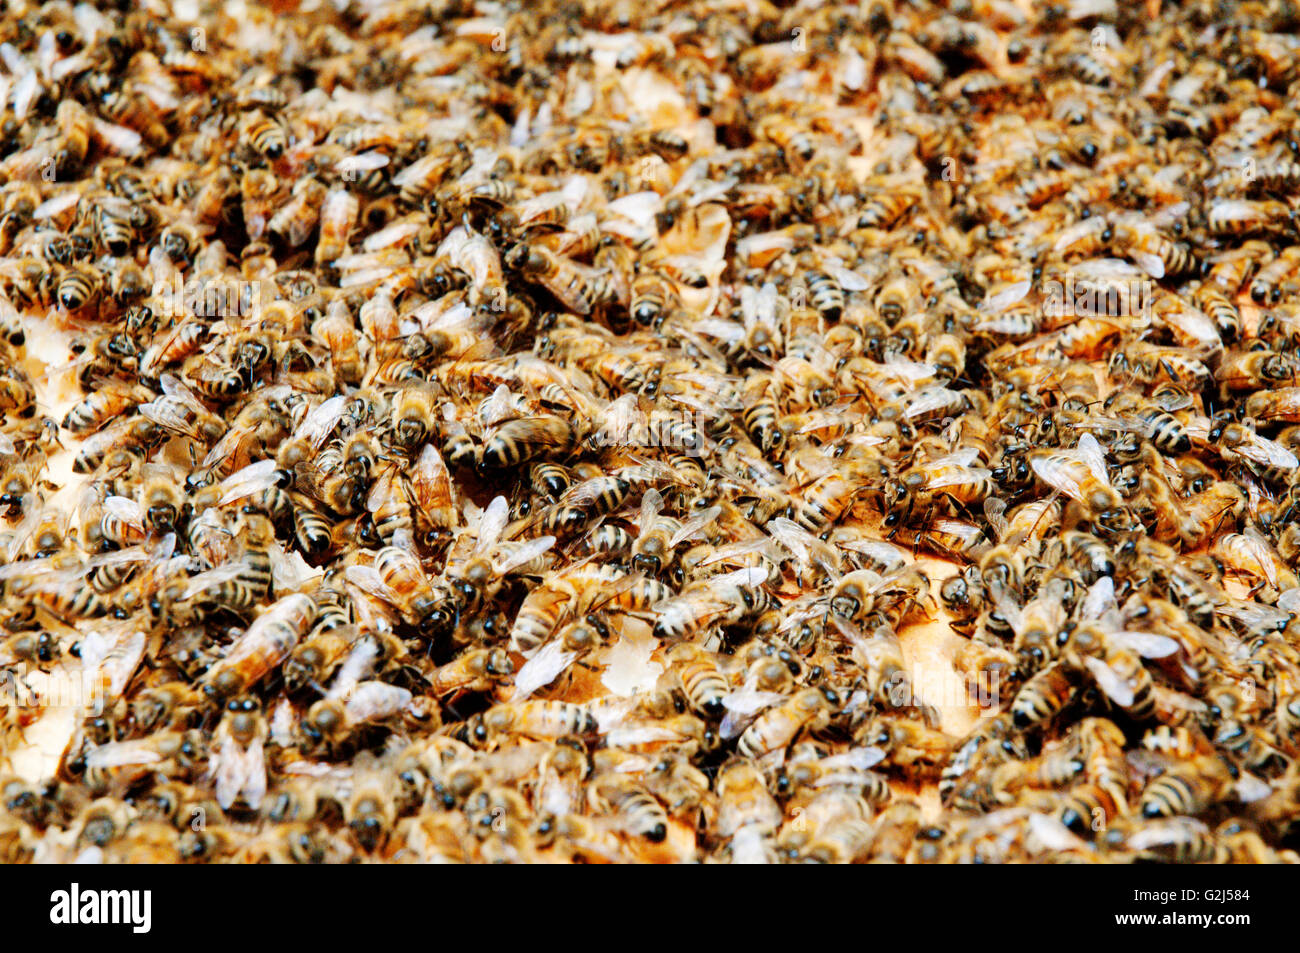 Swarm of Honey Bees on Hive Frame Stock Photo